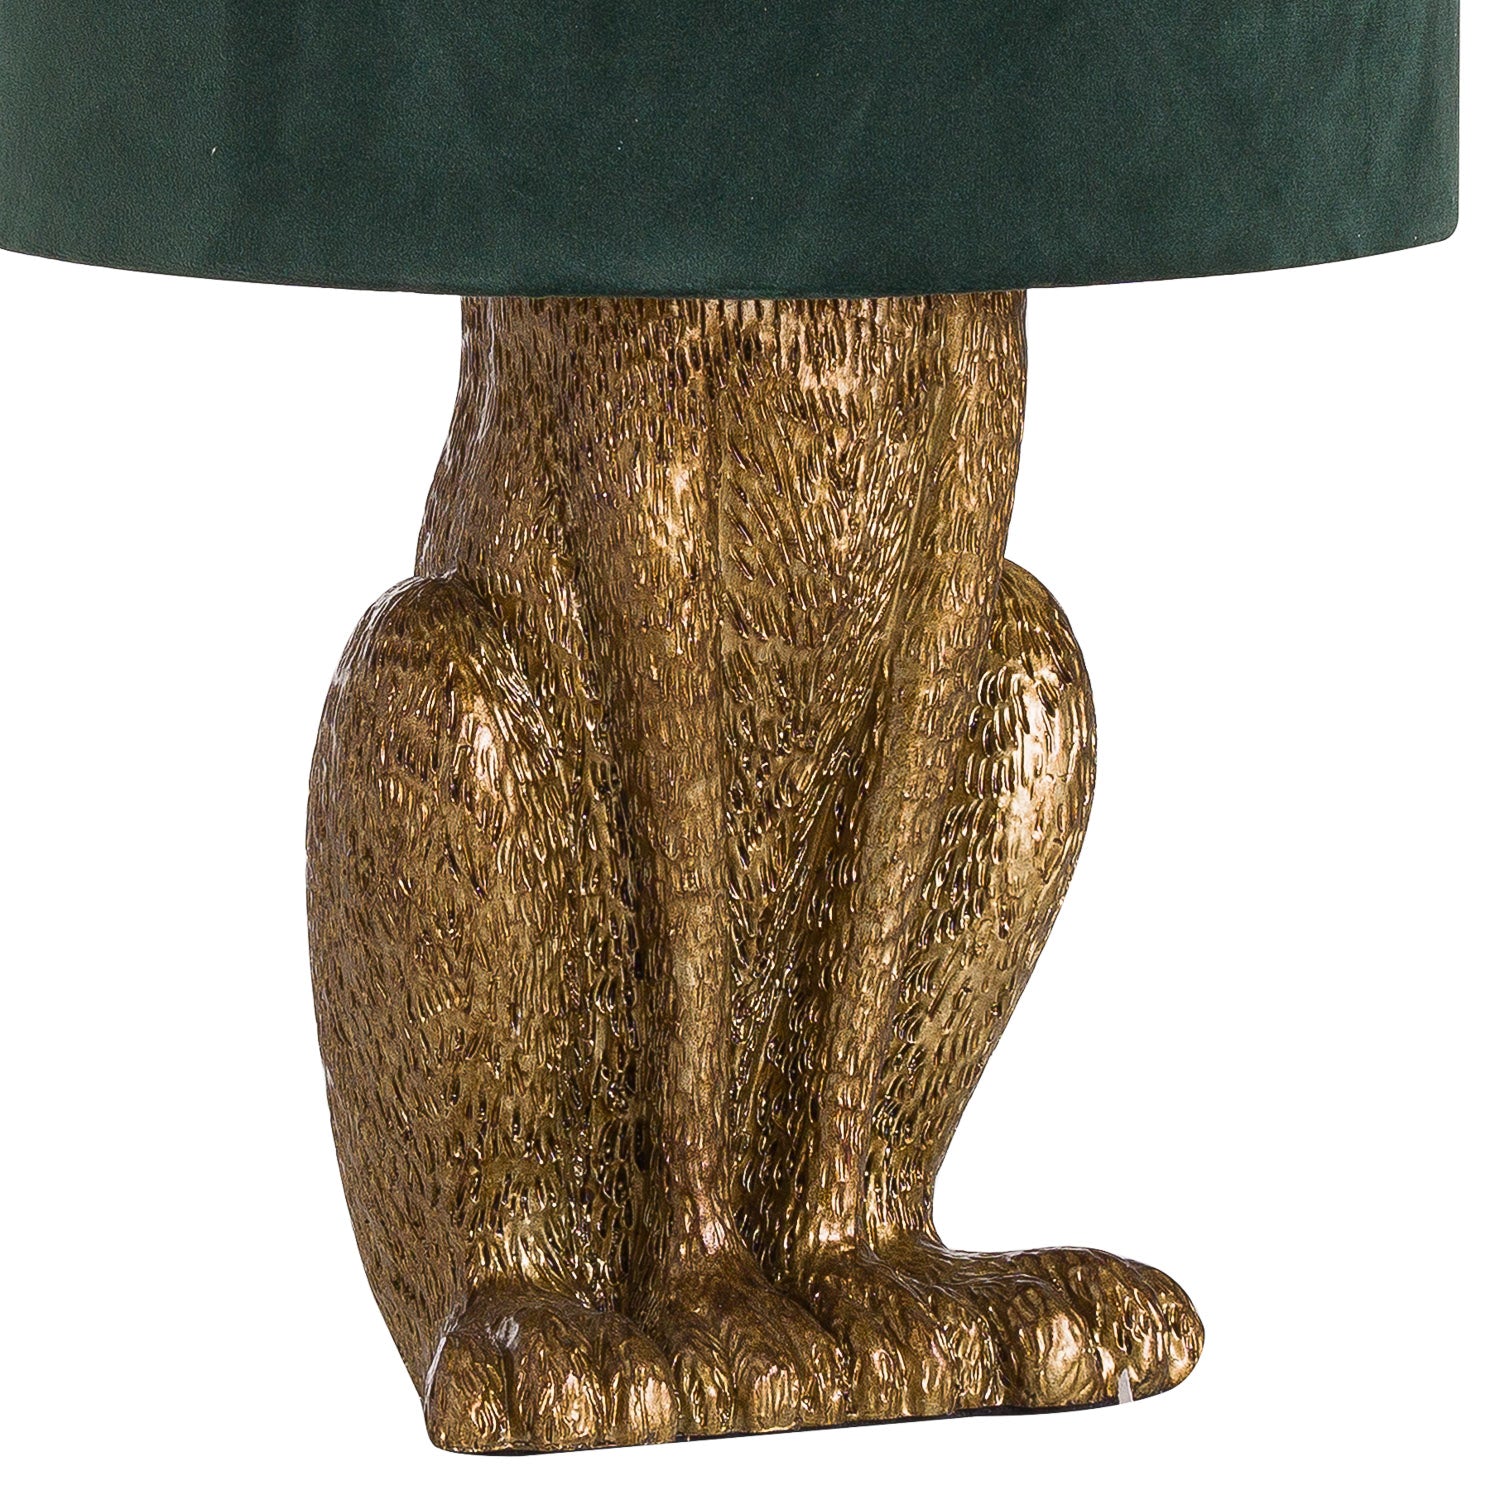 The Hartley Hare Table Lamp in two colours